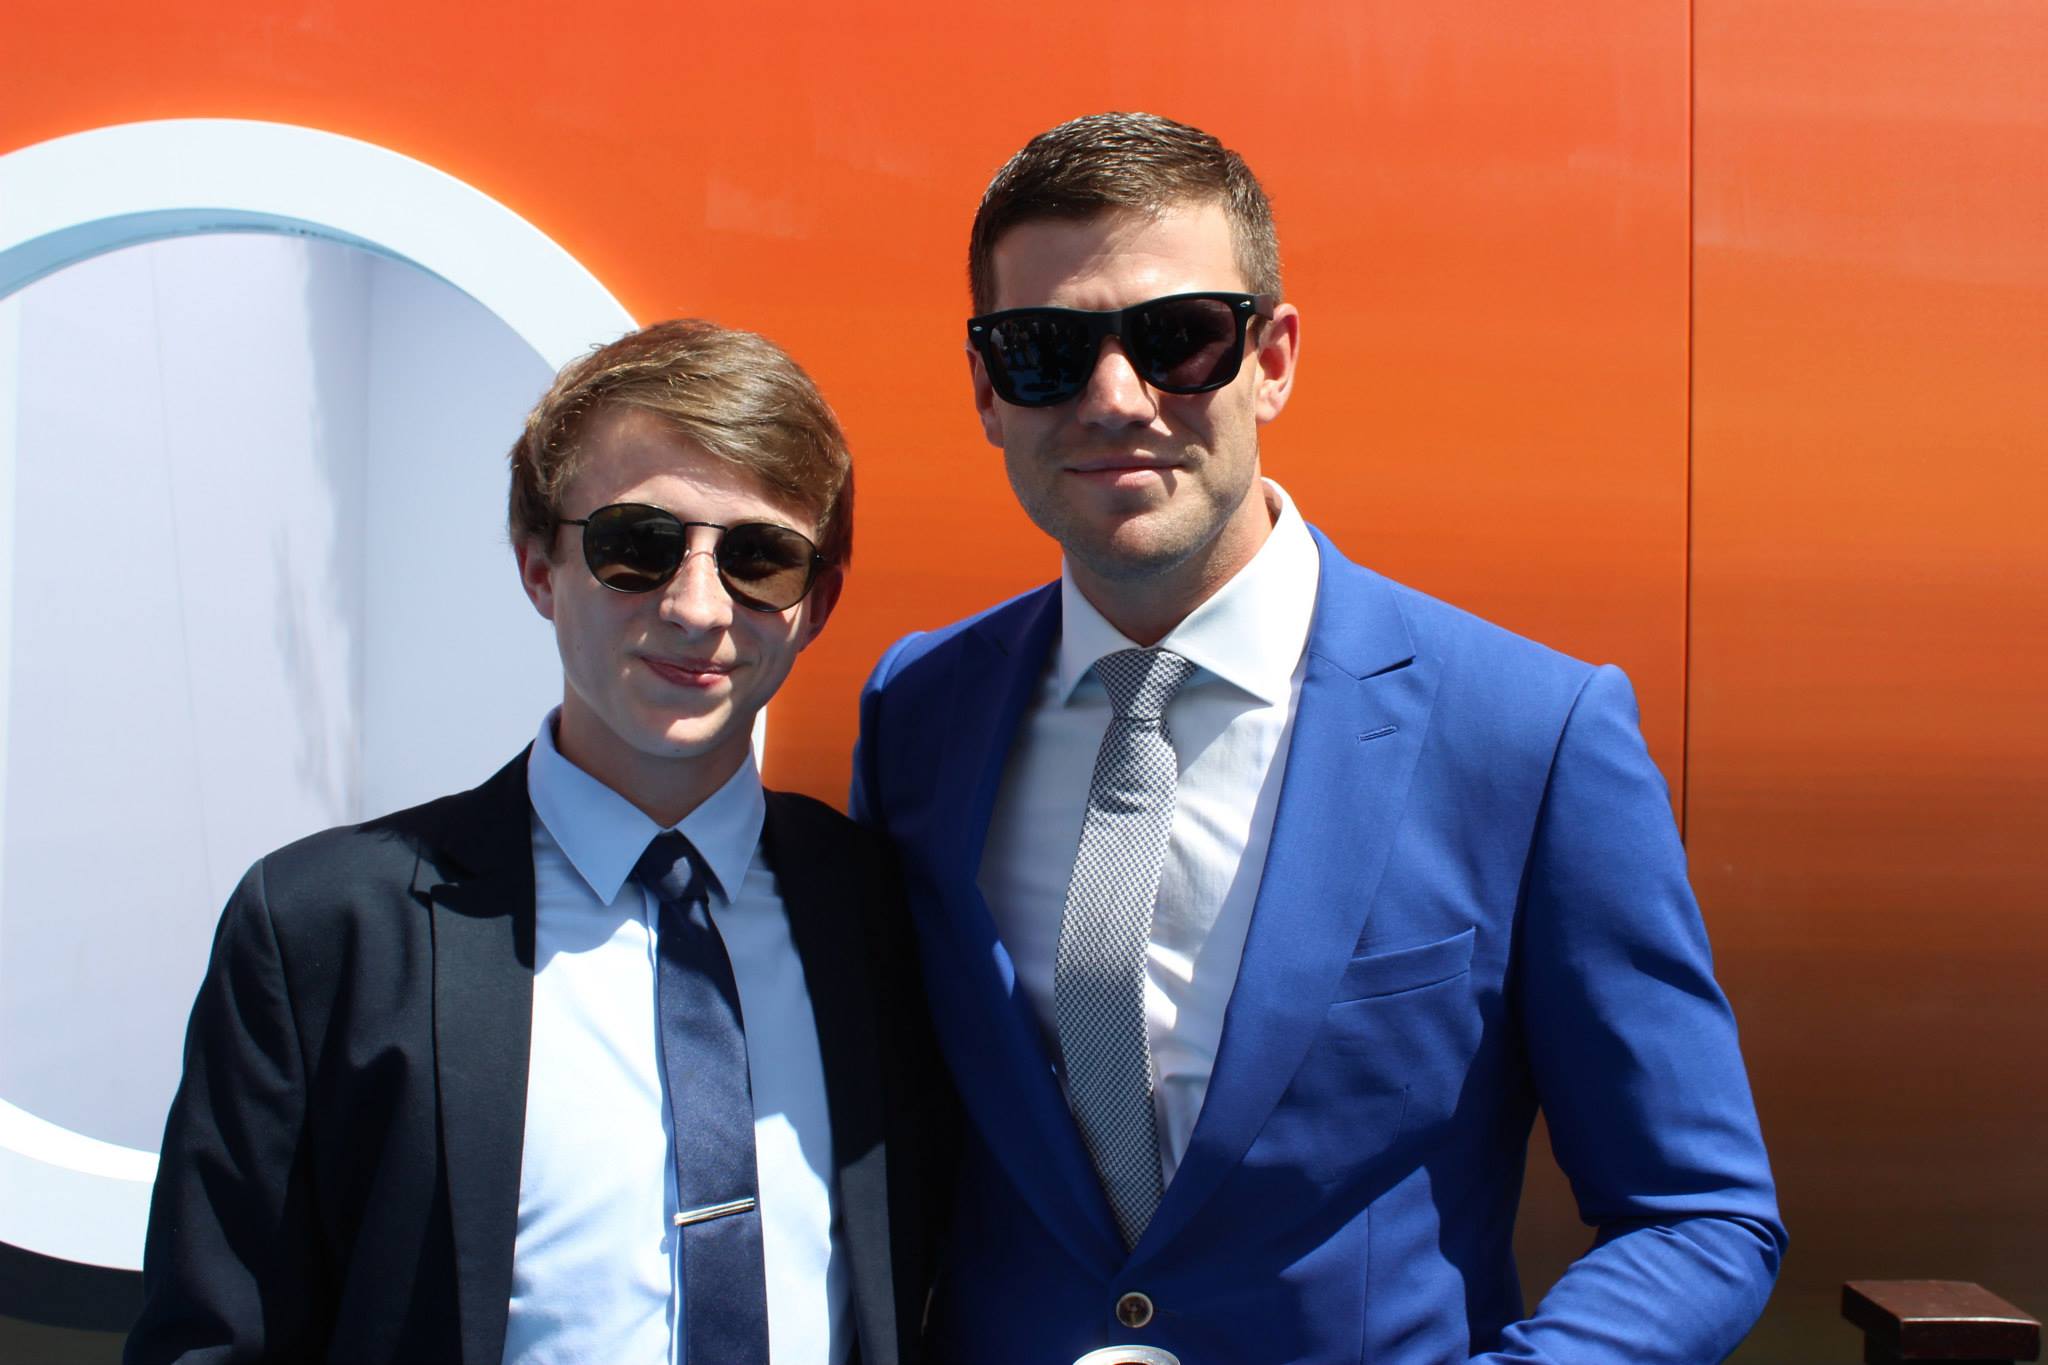 Kevin Moody and Austin Stowell at the premiere of Warner Bros. Pictures' 